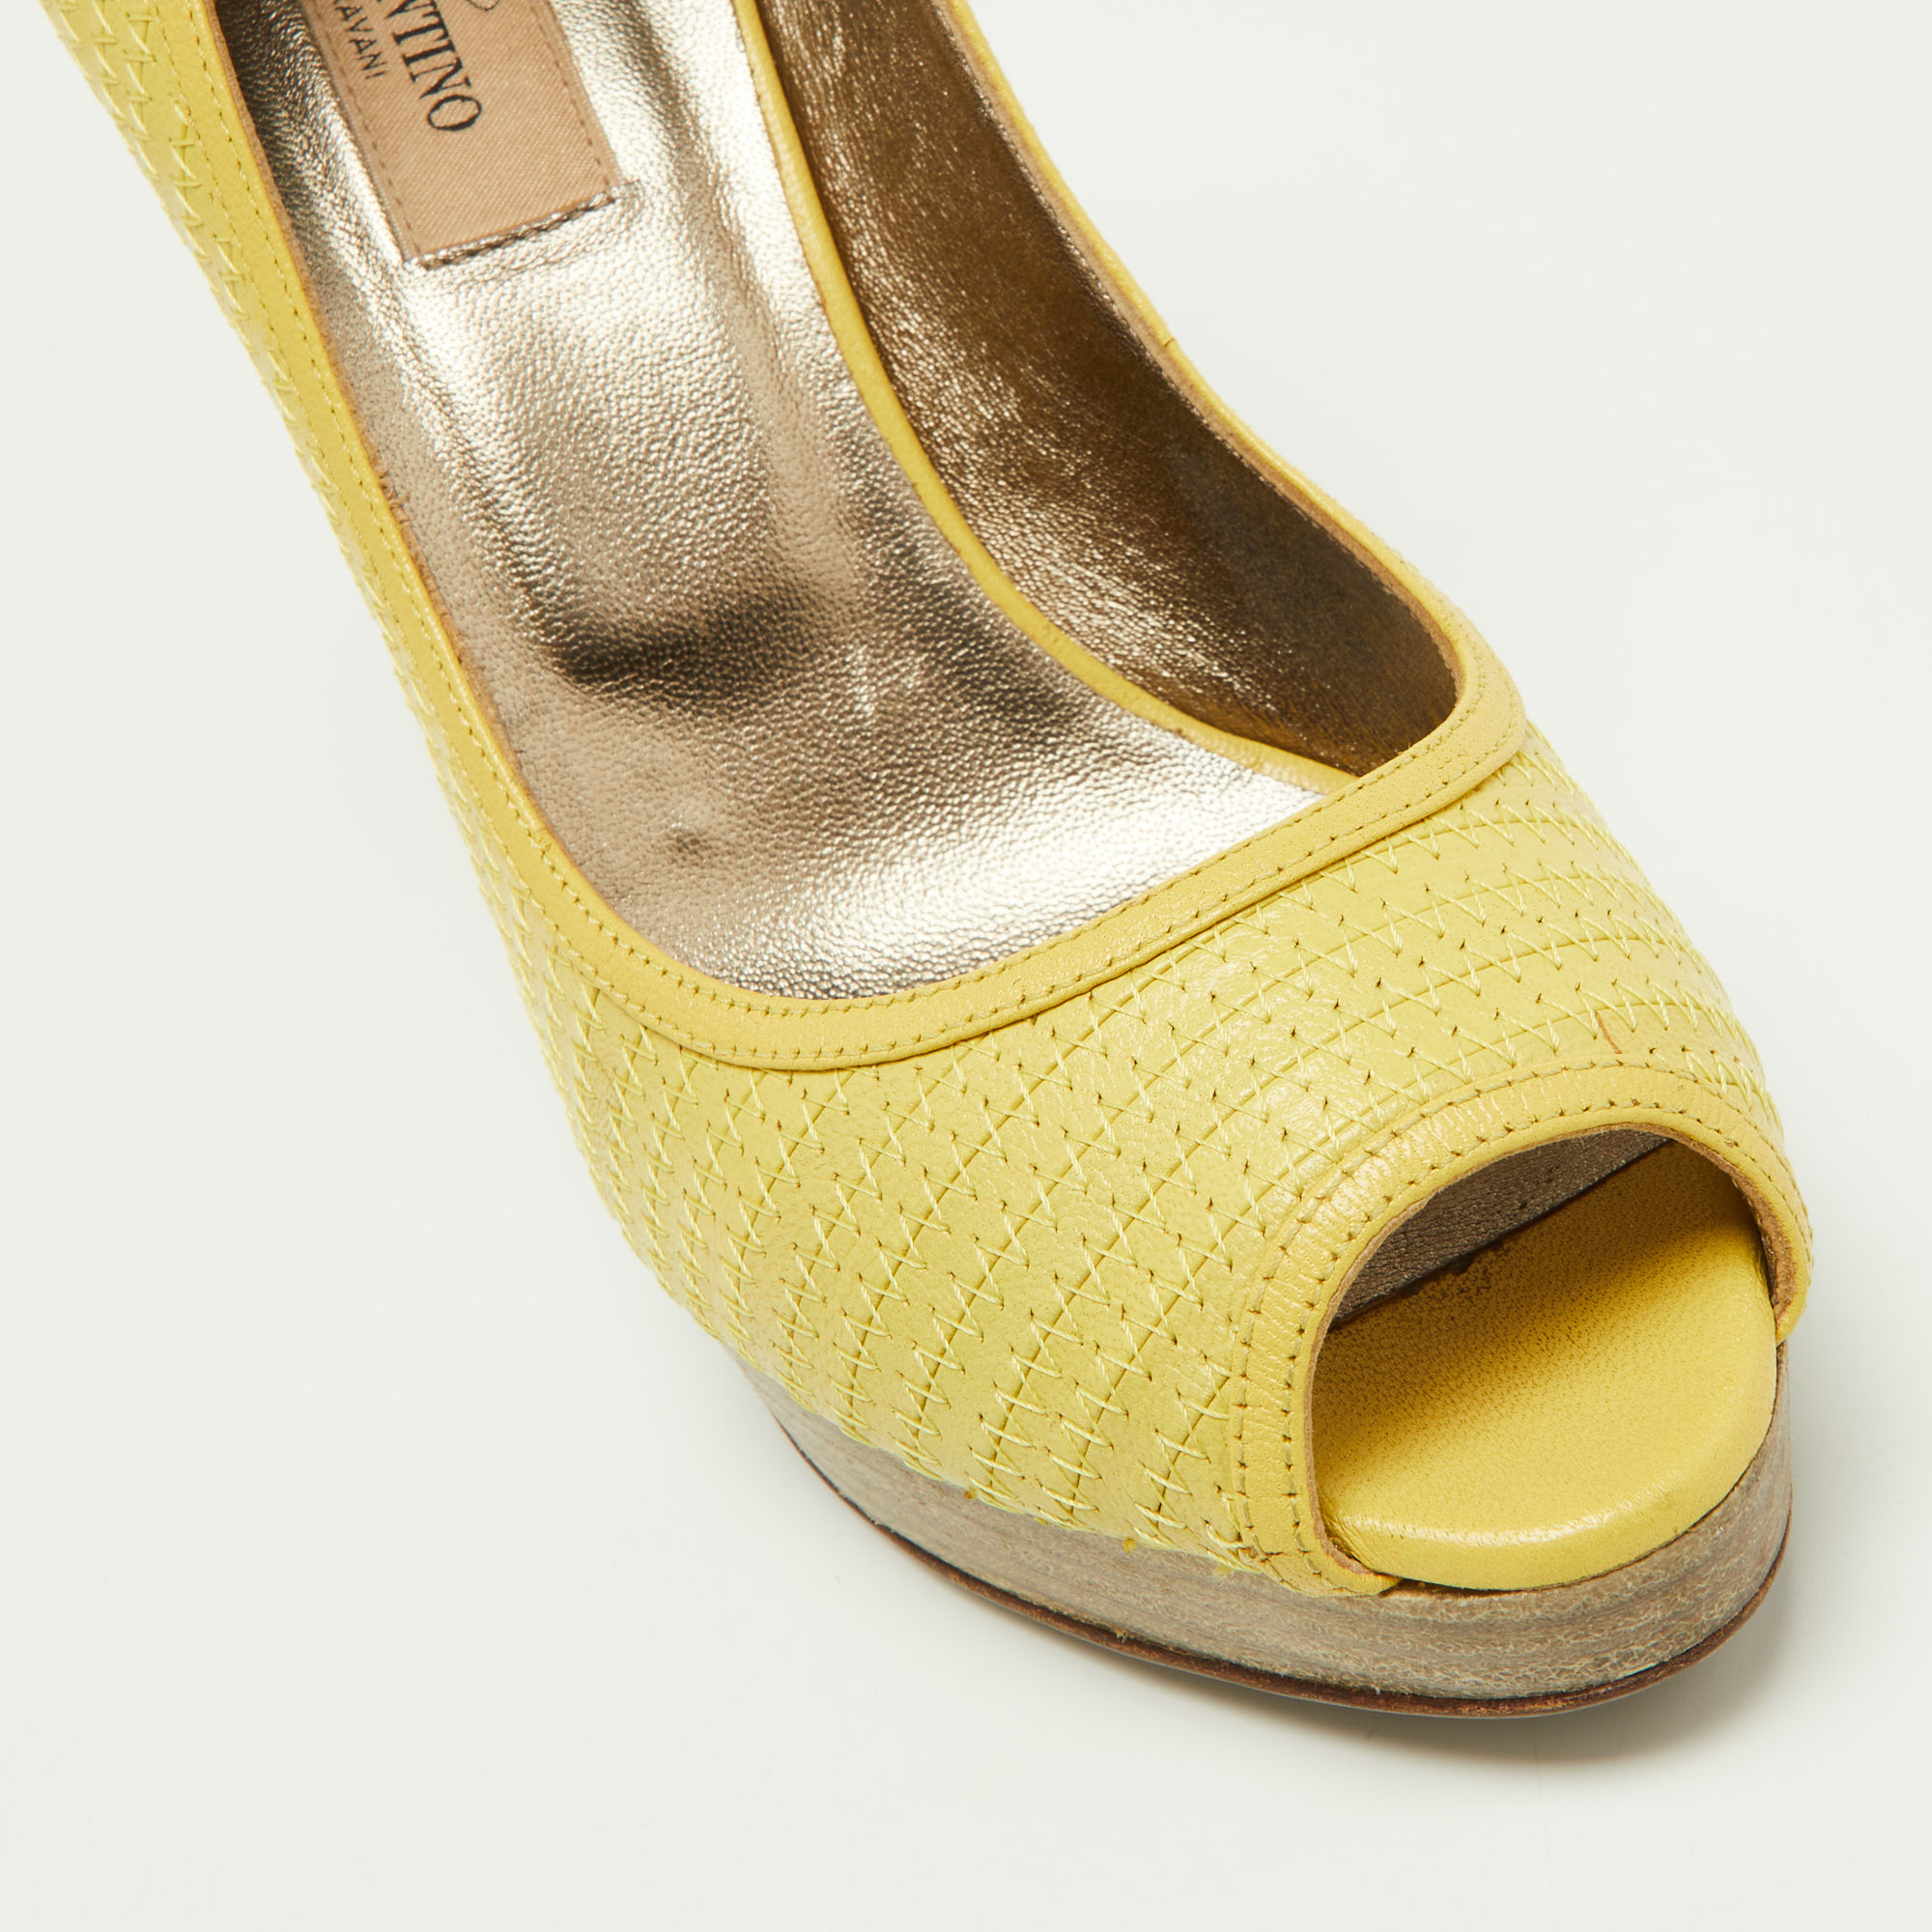 Valentino Yellow Embroidered Leather Peep Toe Platform Pumps Size 37